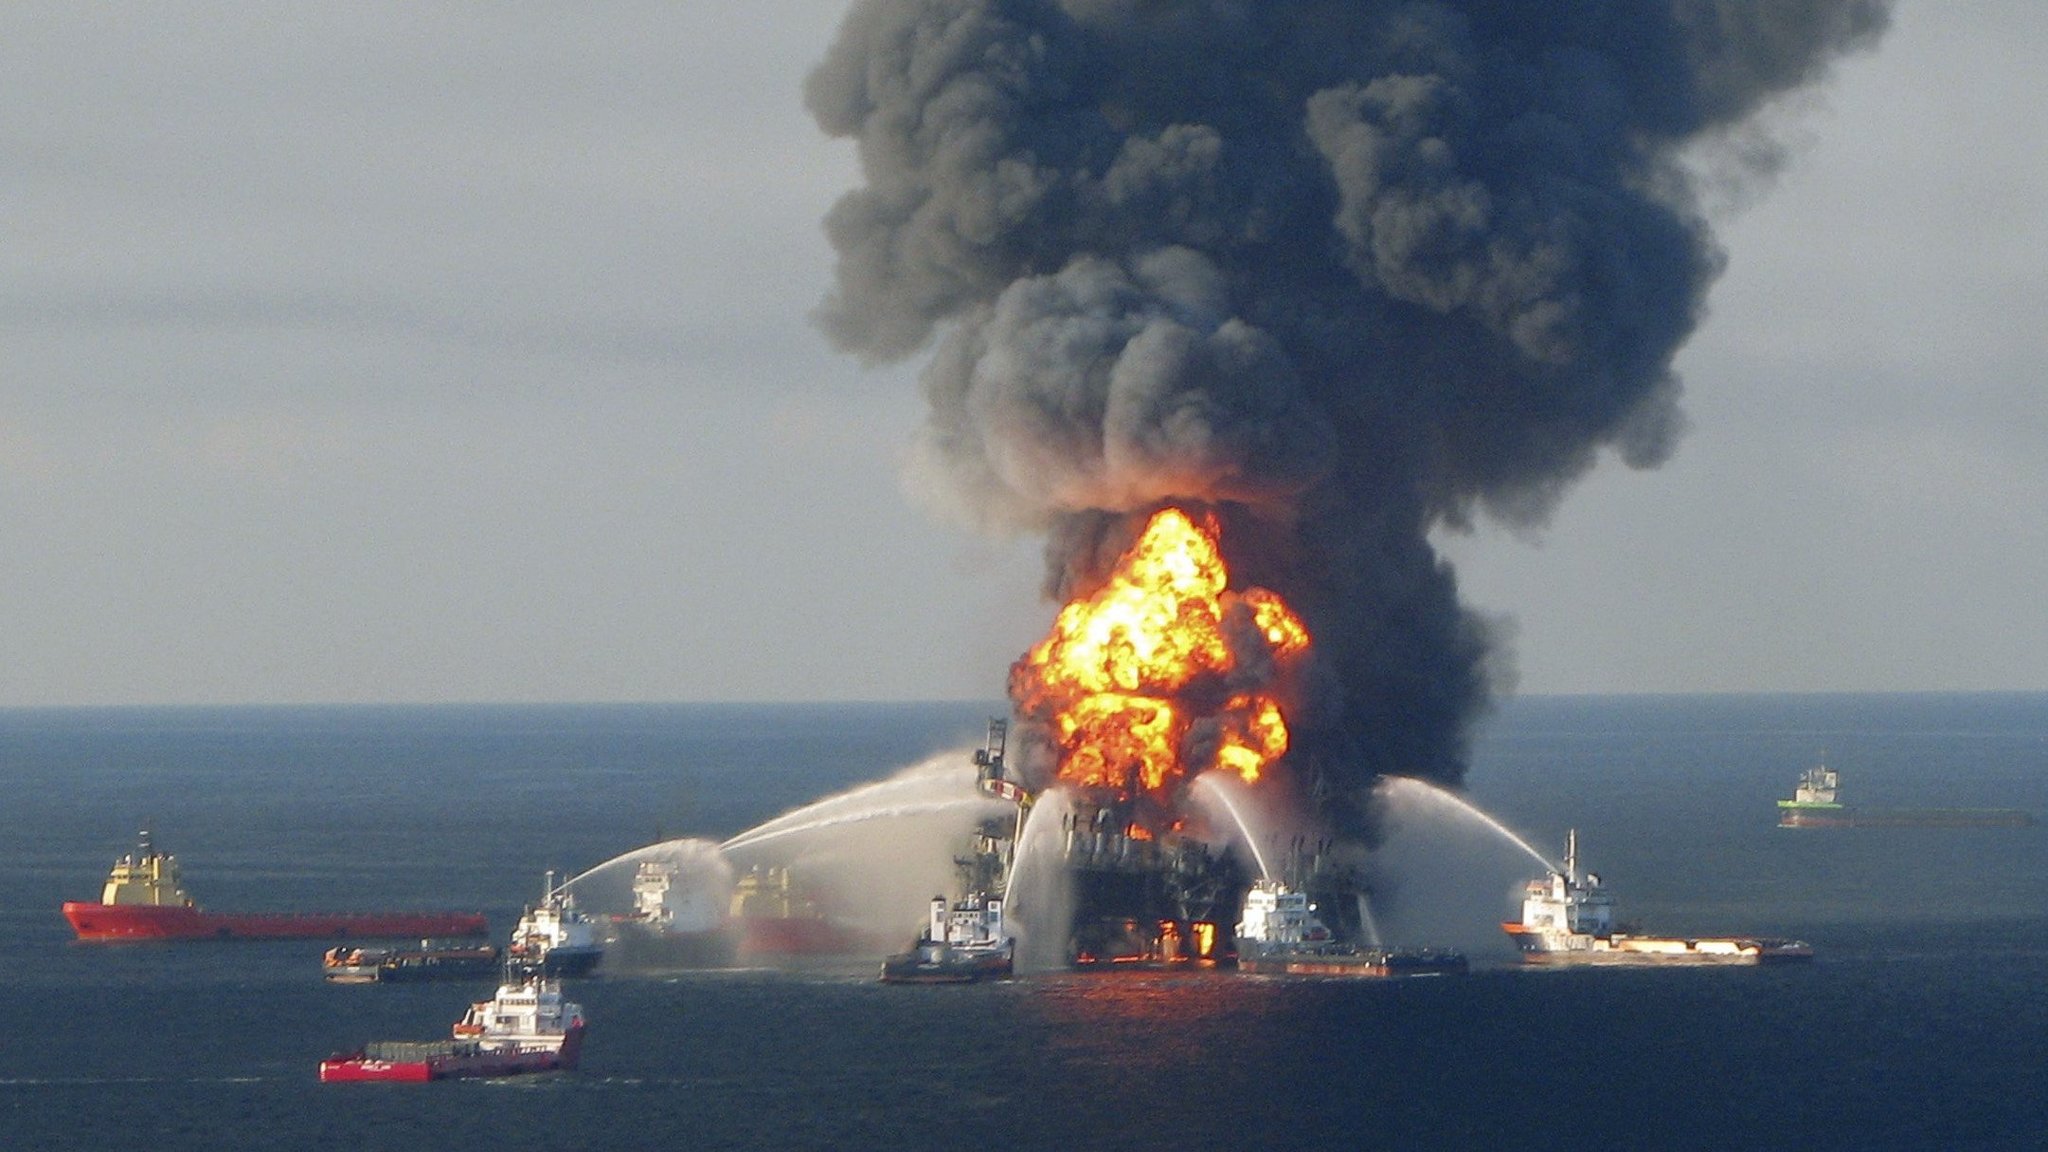 Deepwater Horizon film fumbles with facts